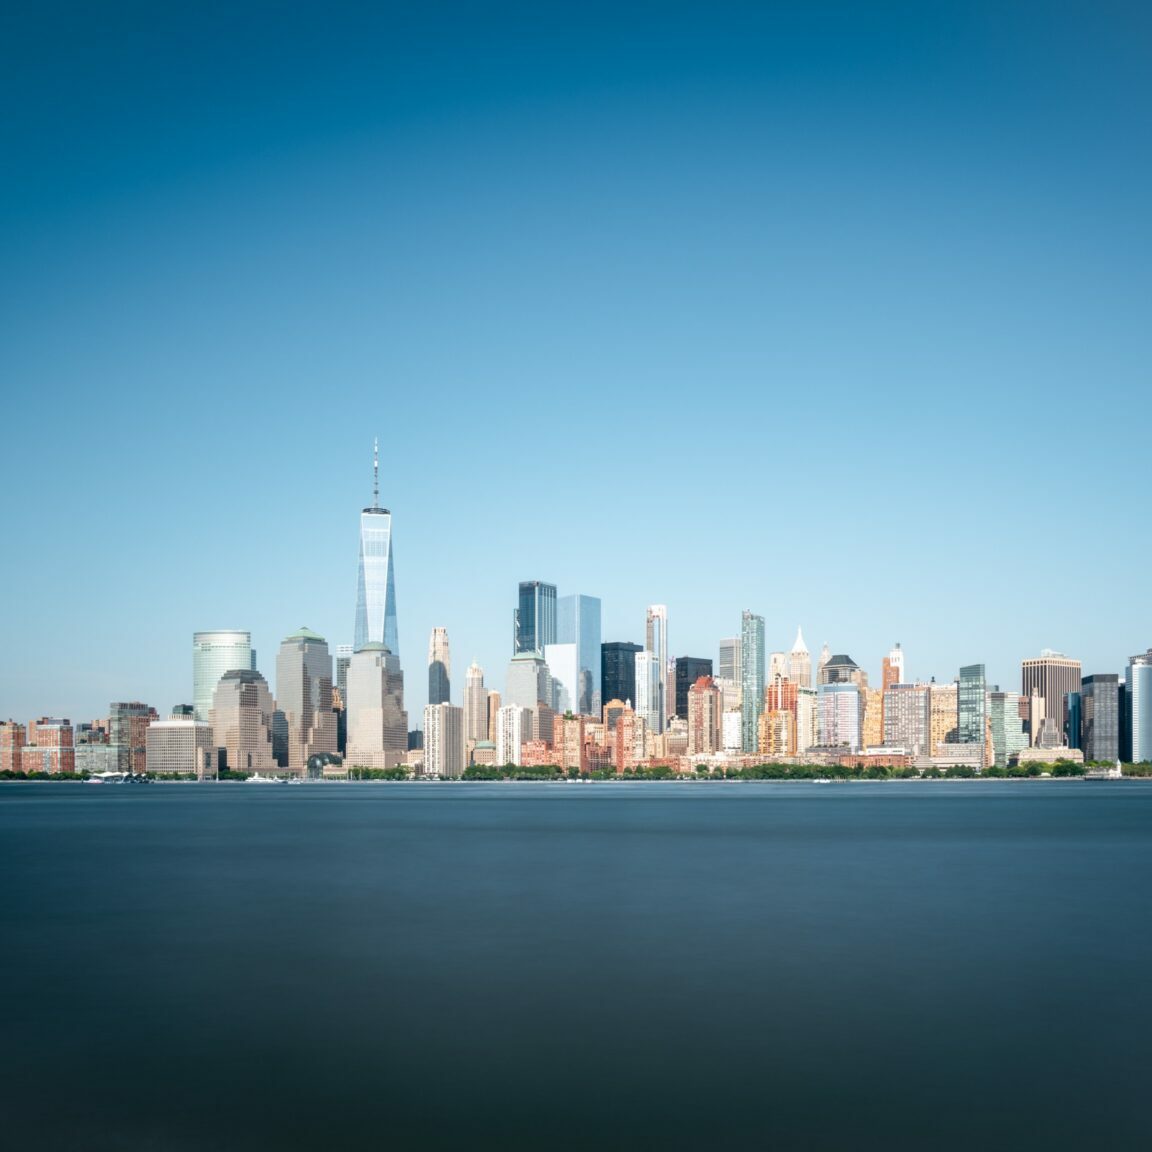 A view from the Atlantic Ocean of the New York skyline